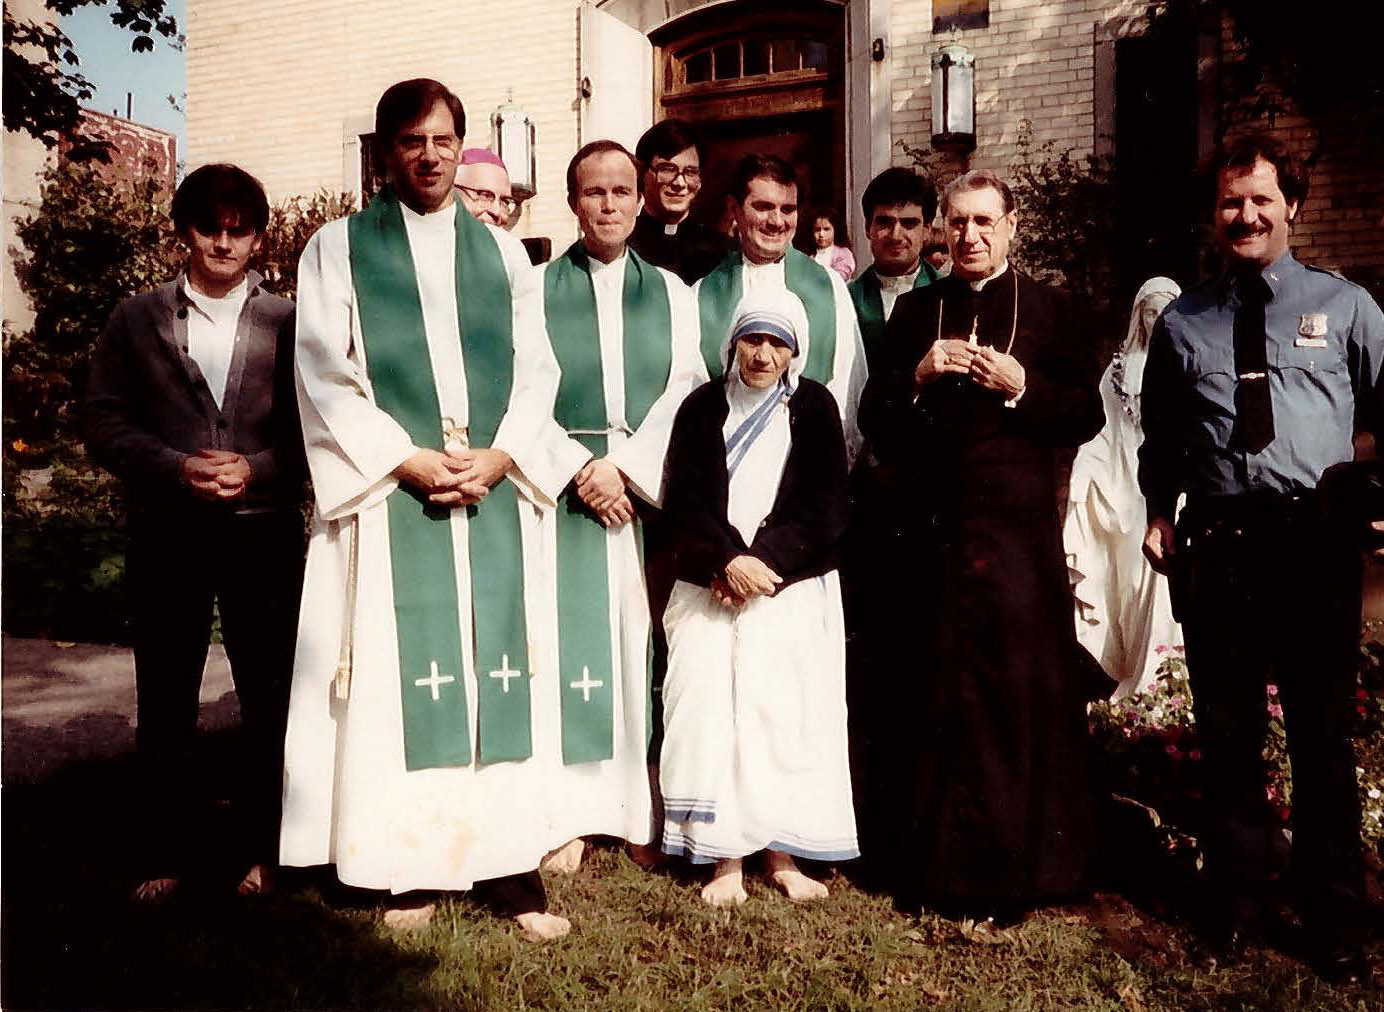 Group photo of Msgr. Sheehy with Mother Teresa